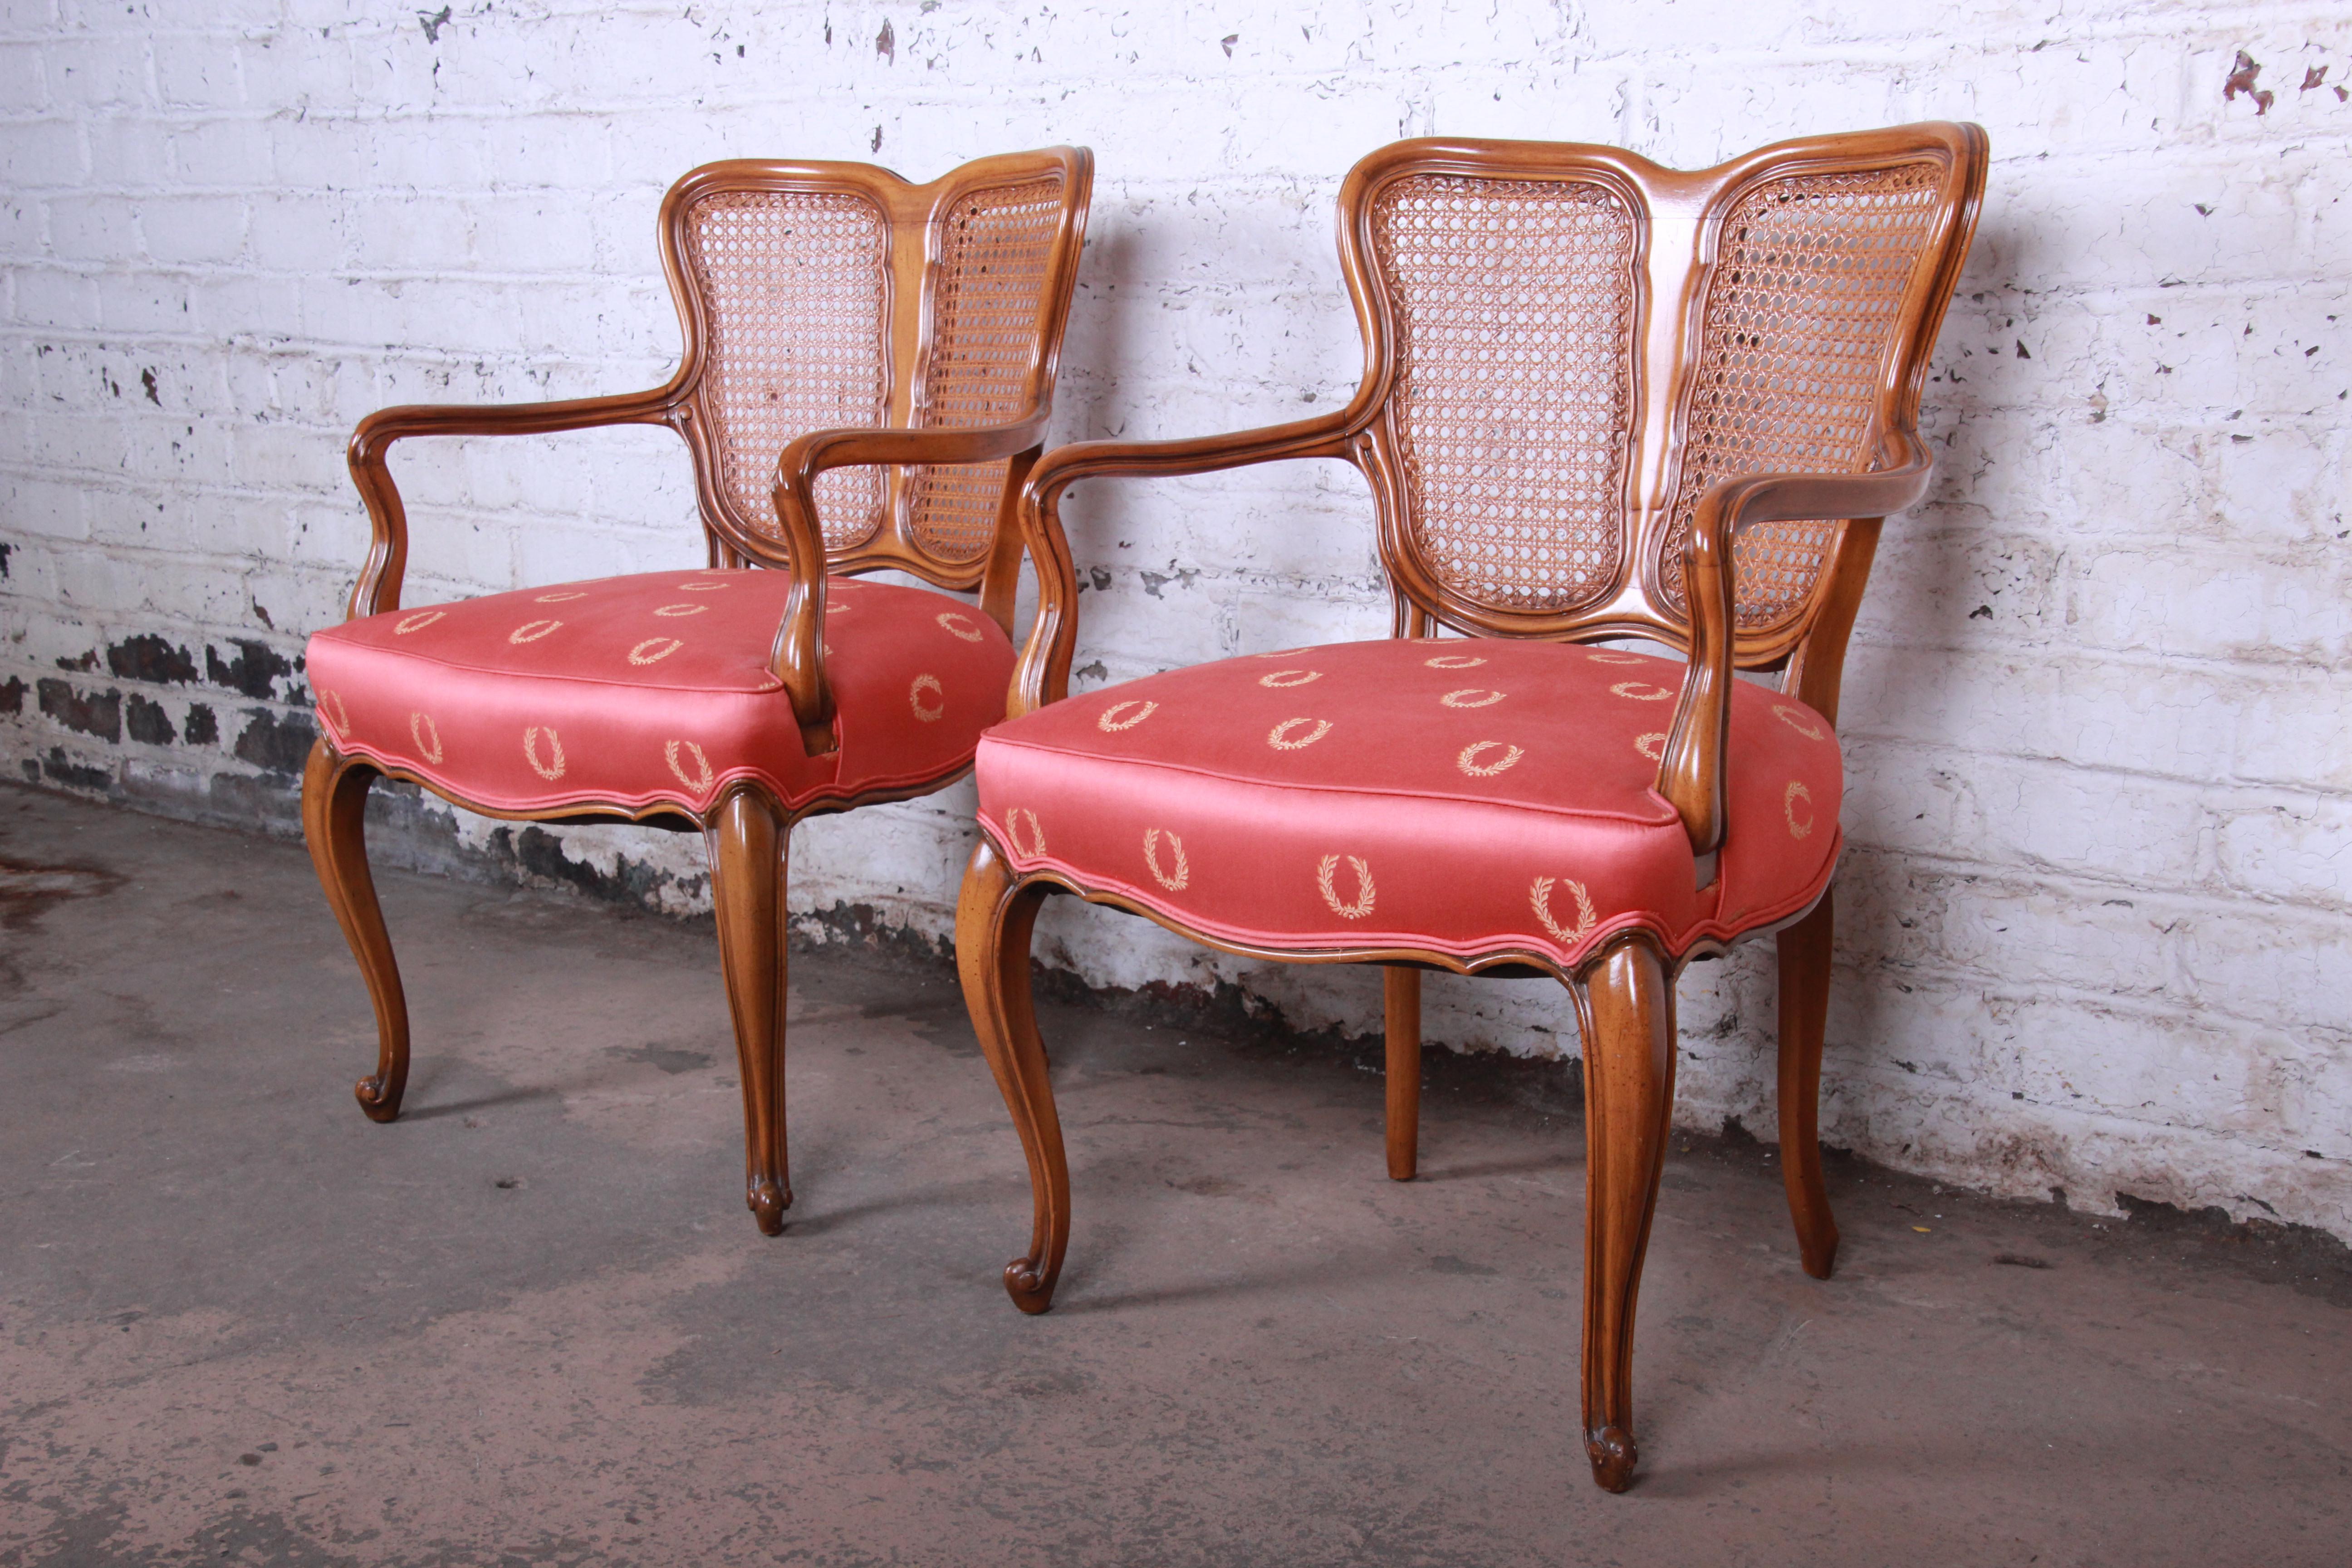 A gorgeous pair of French Provincial Louis XV style armchairs. The chairs feature solid walnut frames with a nice fanned cane back and original soft red/pink upholstery. Similar in quality and craftsmanship to Baker Furniture, although the chairs